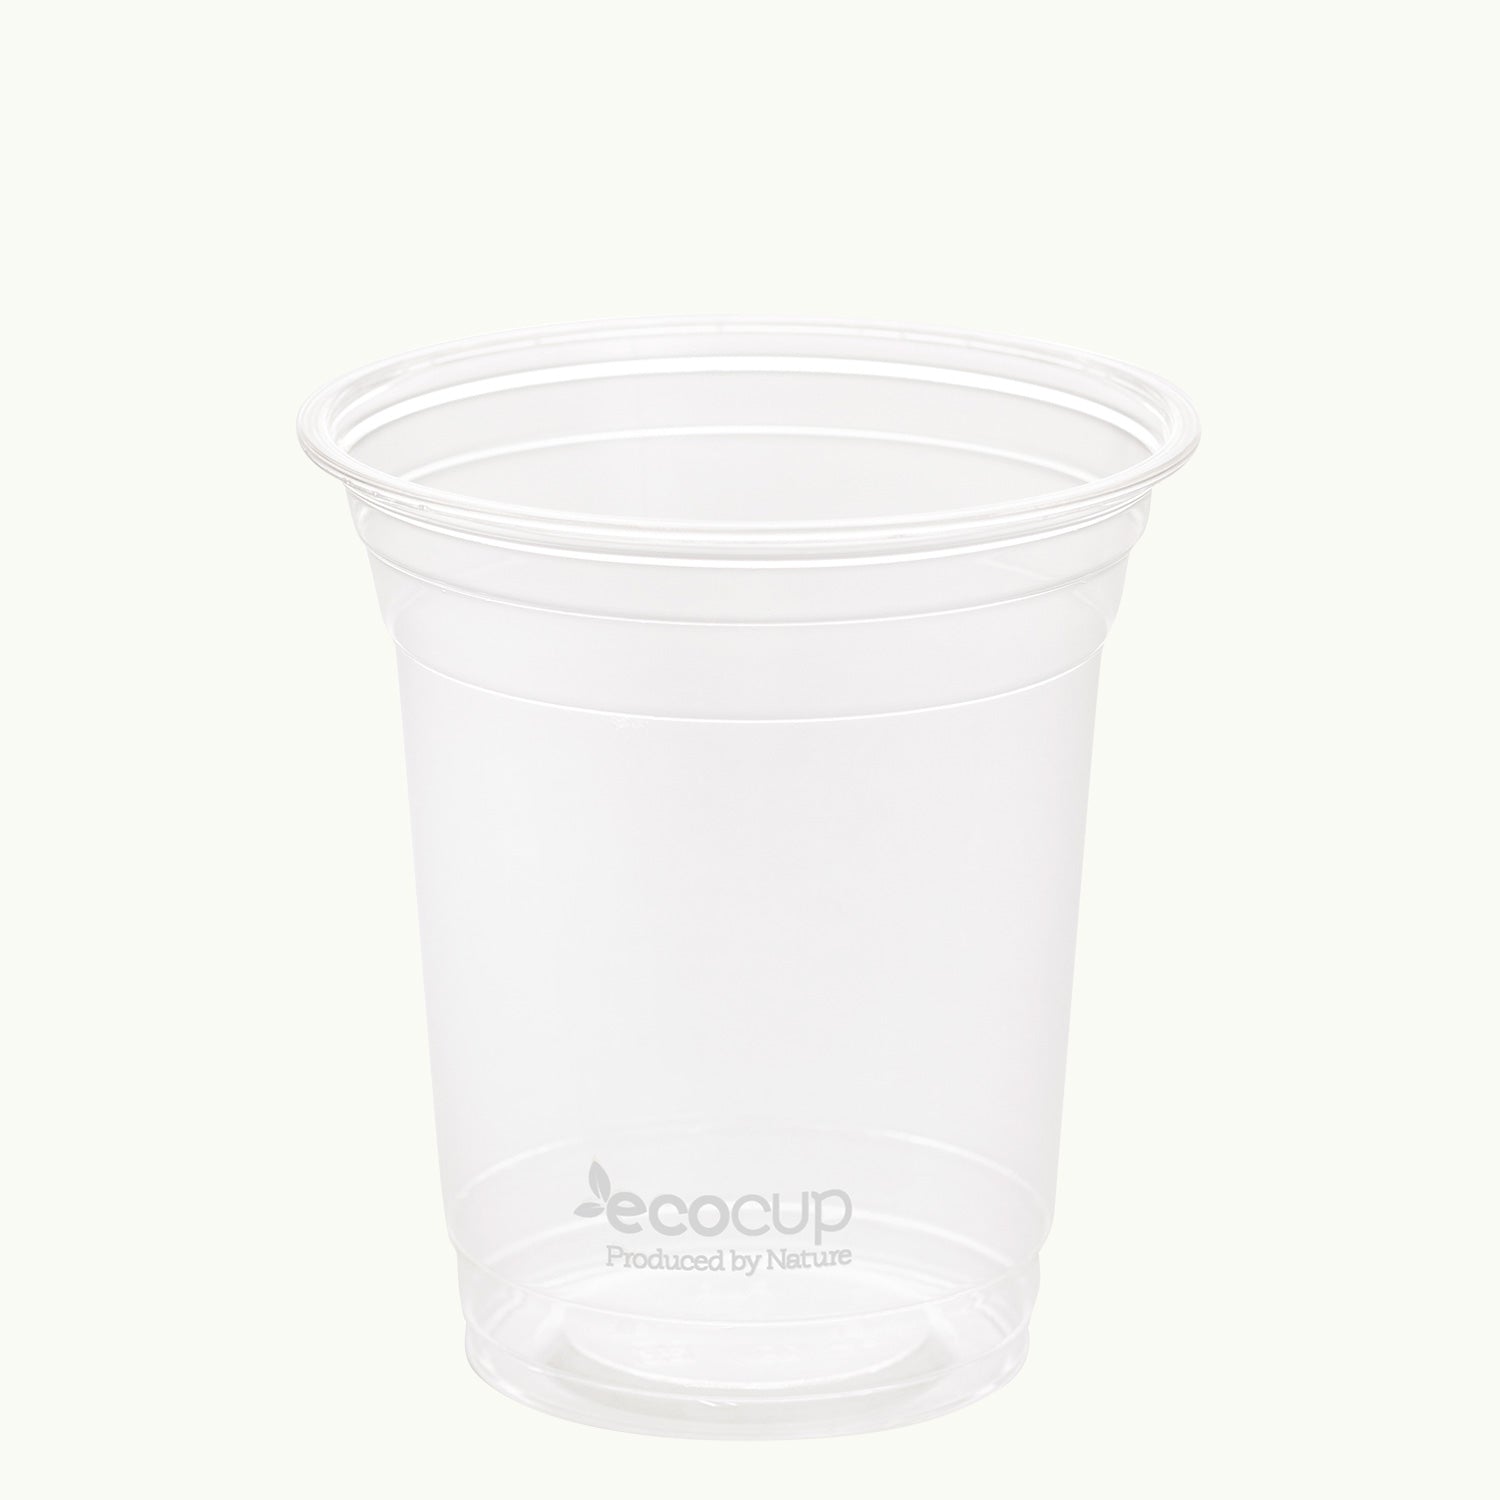 Ecoware bioplastic white logo clear EcoCup.